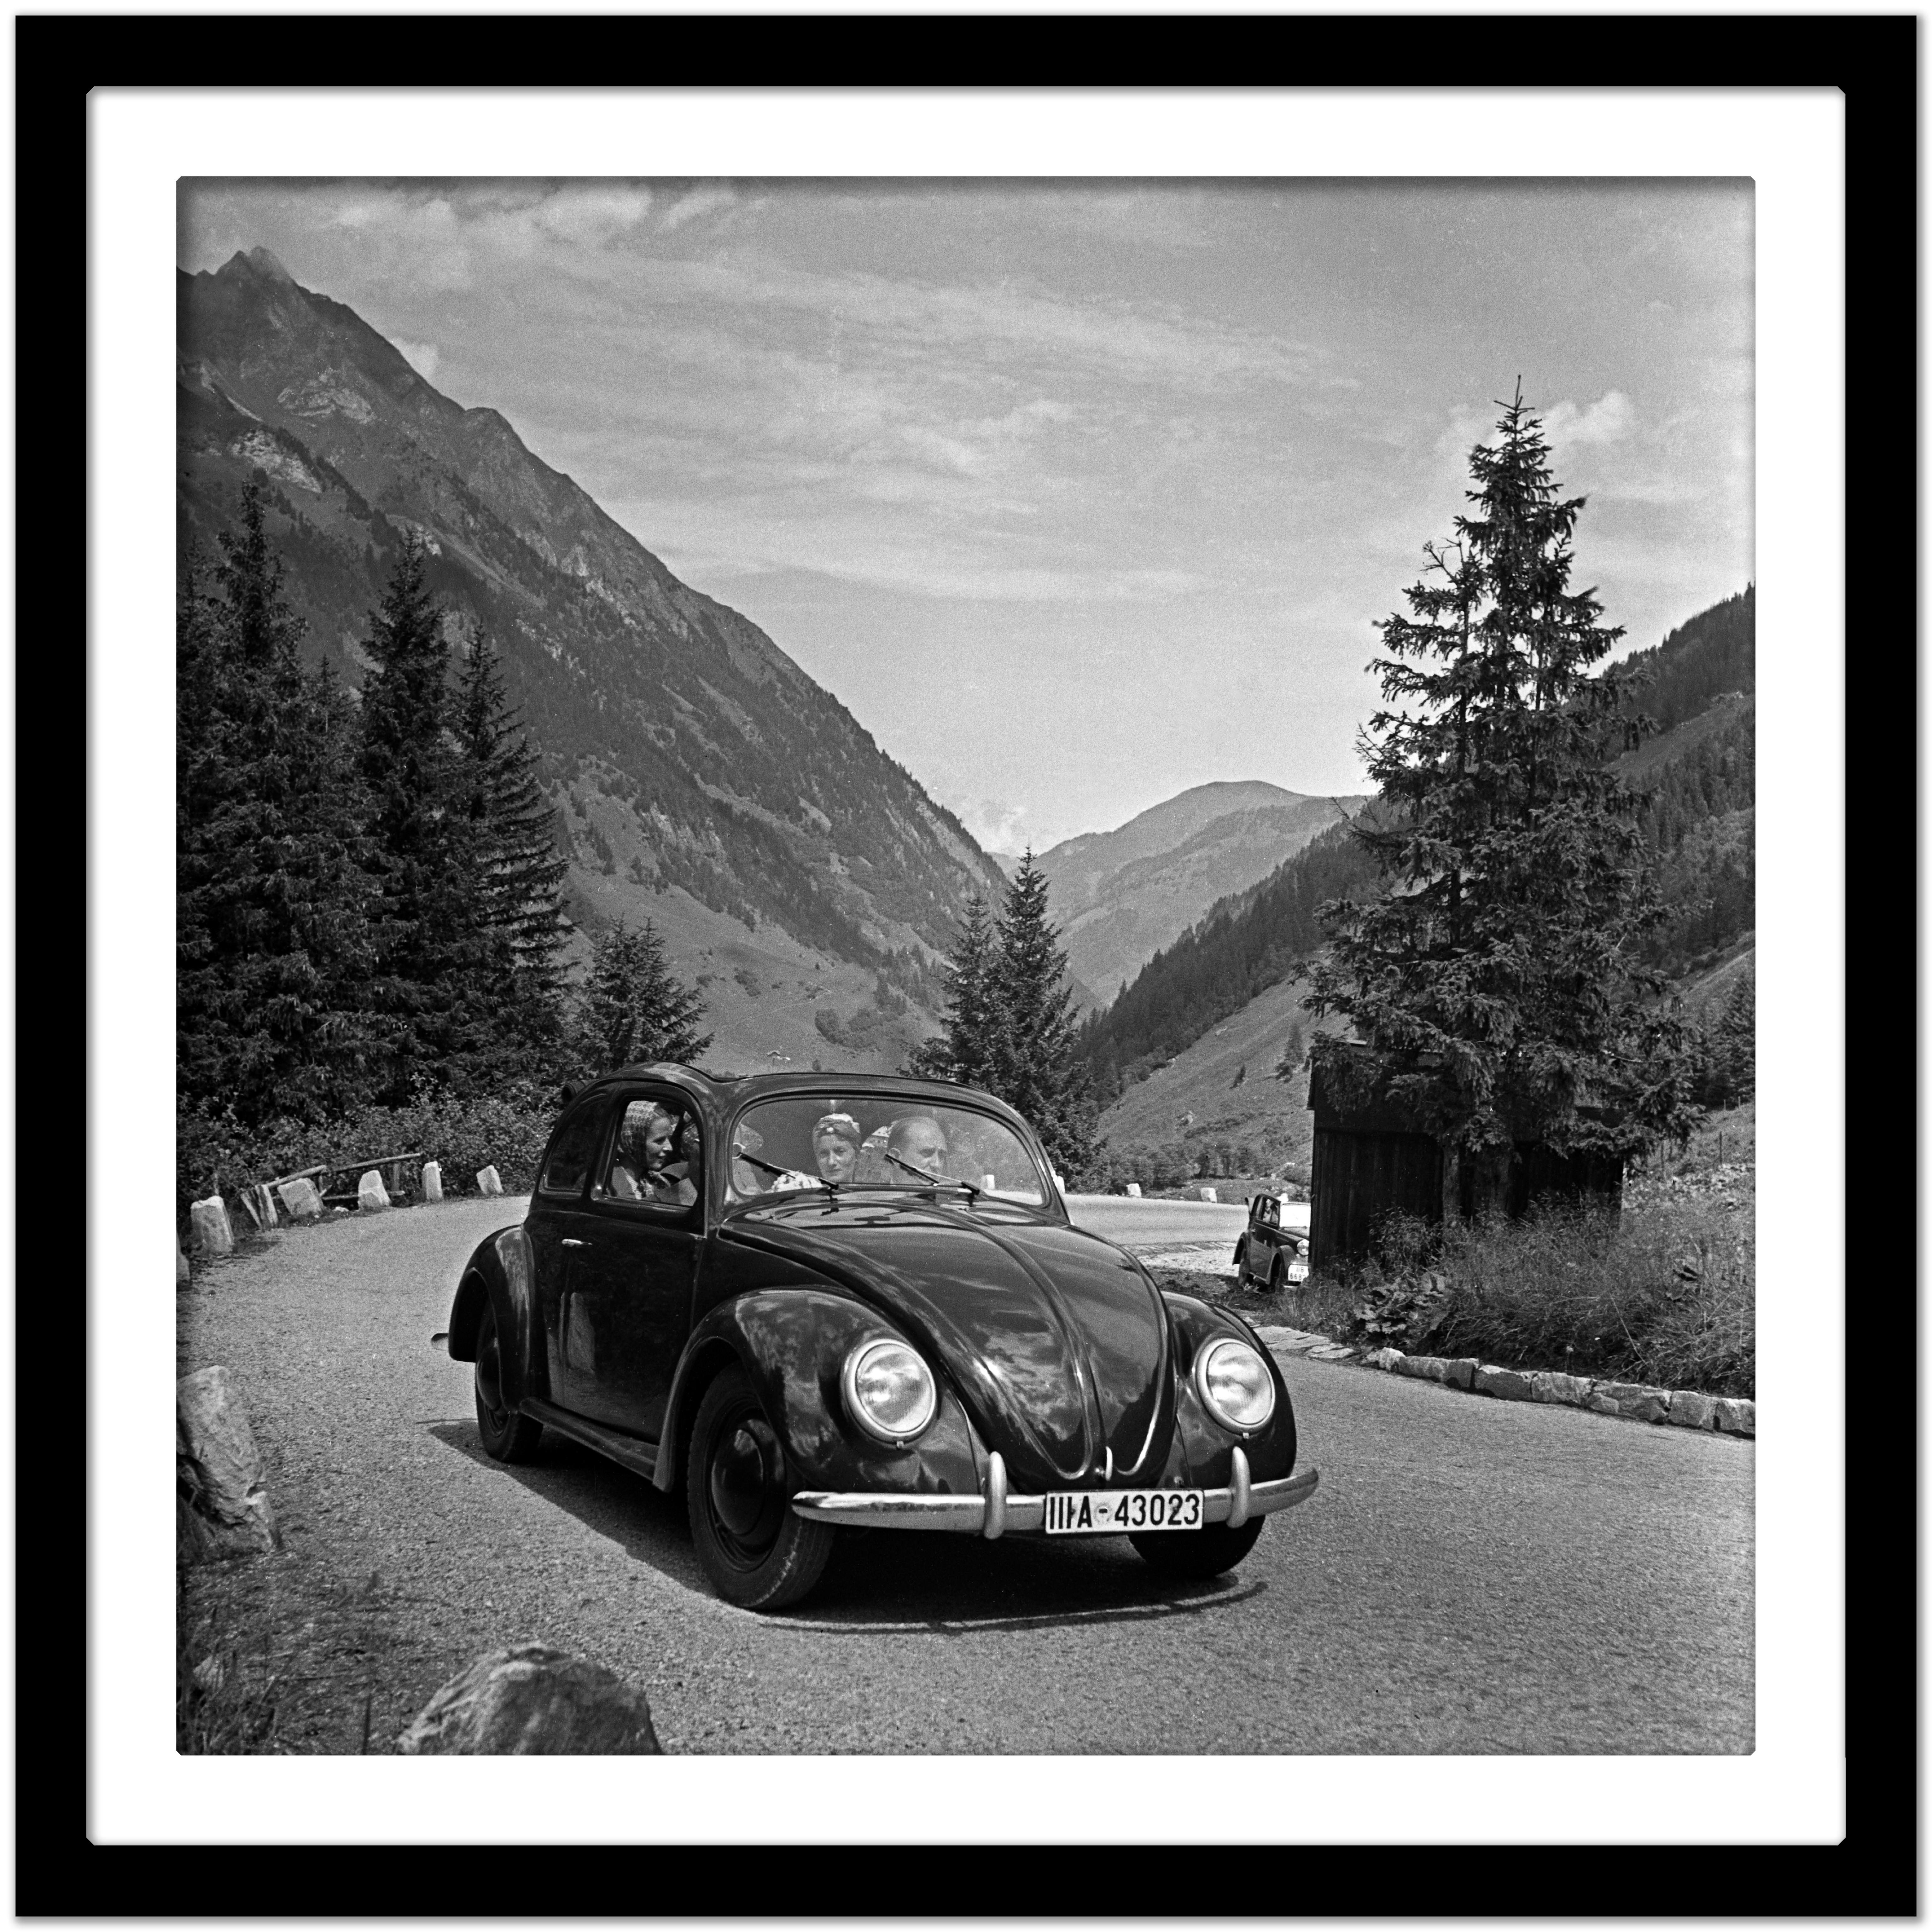 Exploring the countryside in a Volkswagen beetle, Germany 1939 Printed Later - Gray Black and White Photograph by Karl Heinrich Lämmel